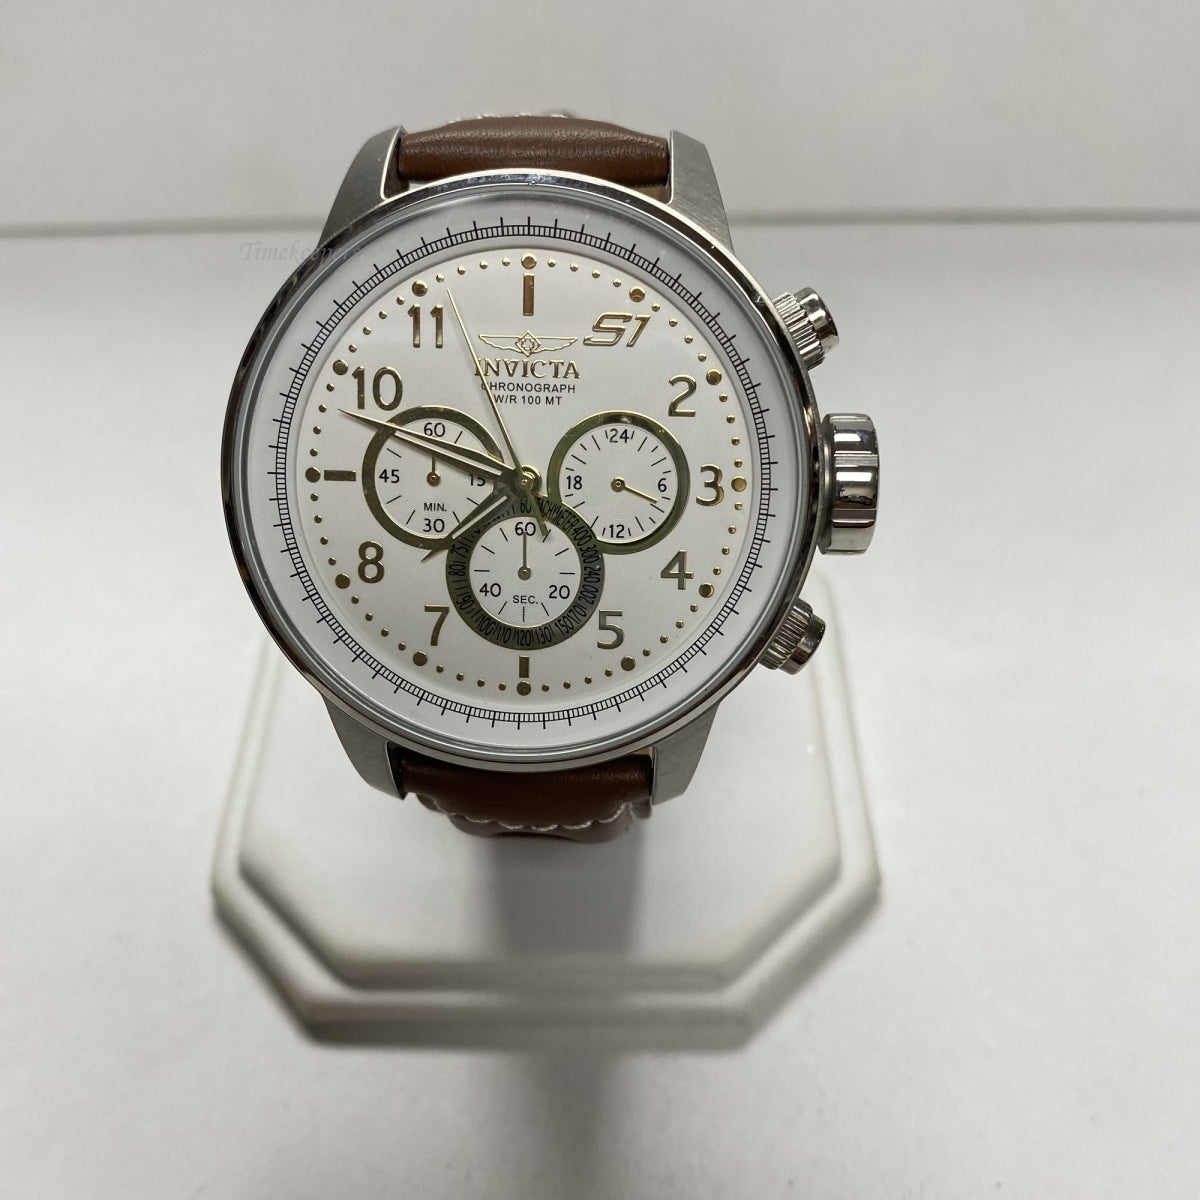 m577 Invicta S1 Rally Chronograph WR 100MT All Stainless Steel